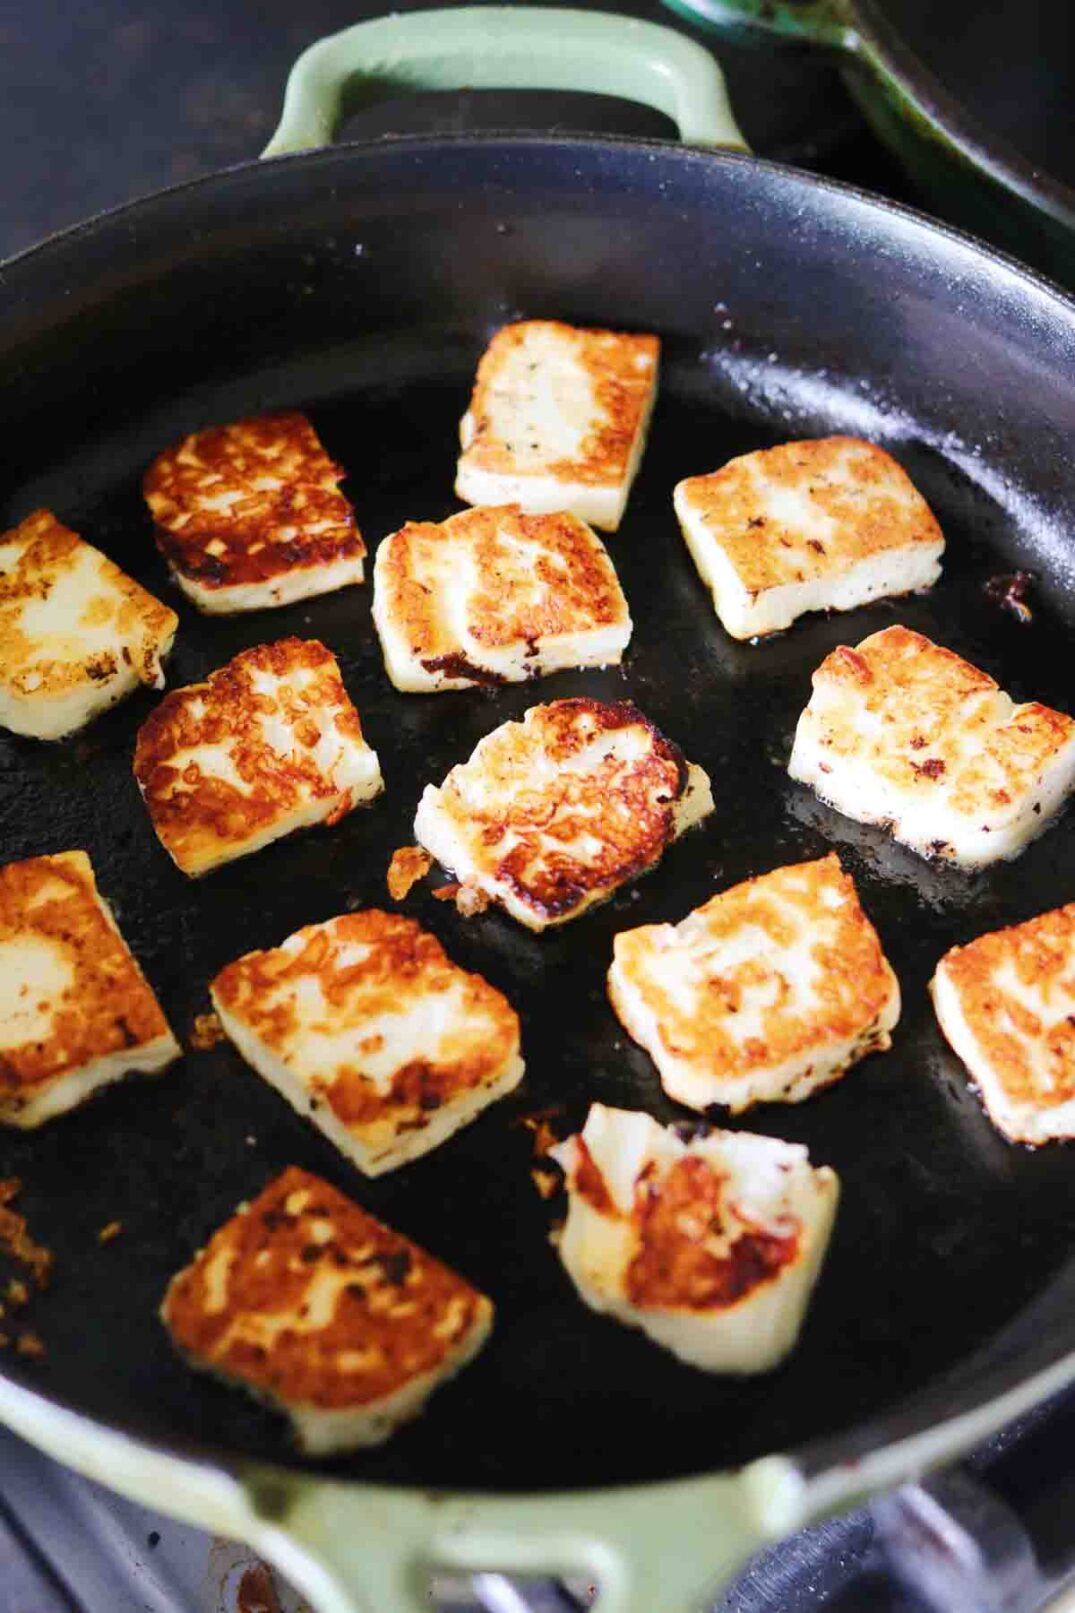 golden brown pieces of halloum in a pan after they've been fried.